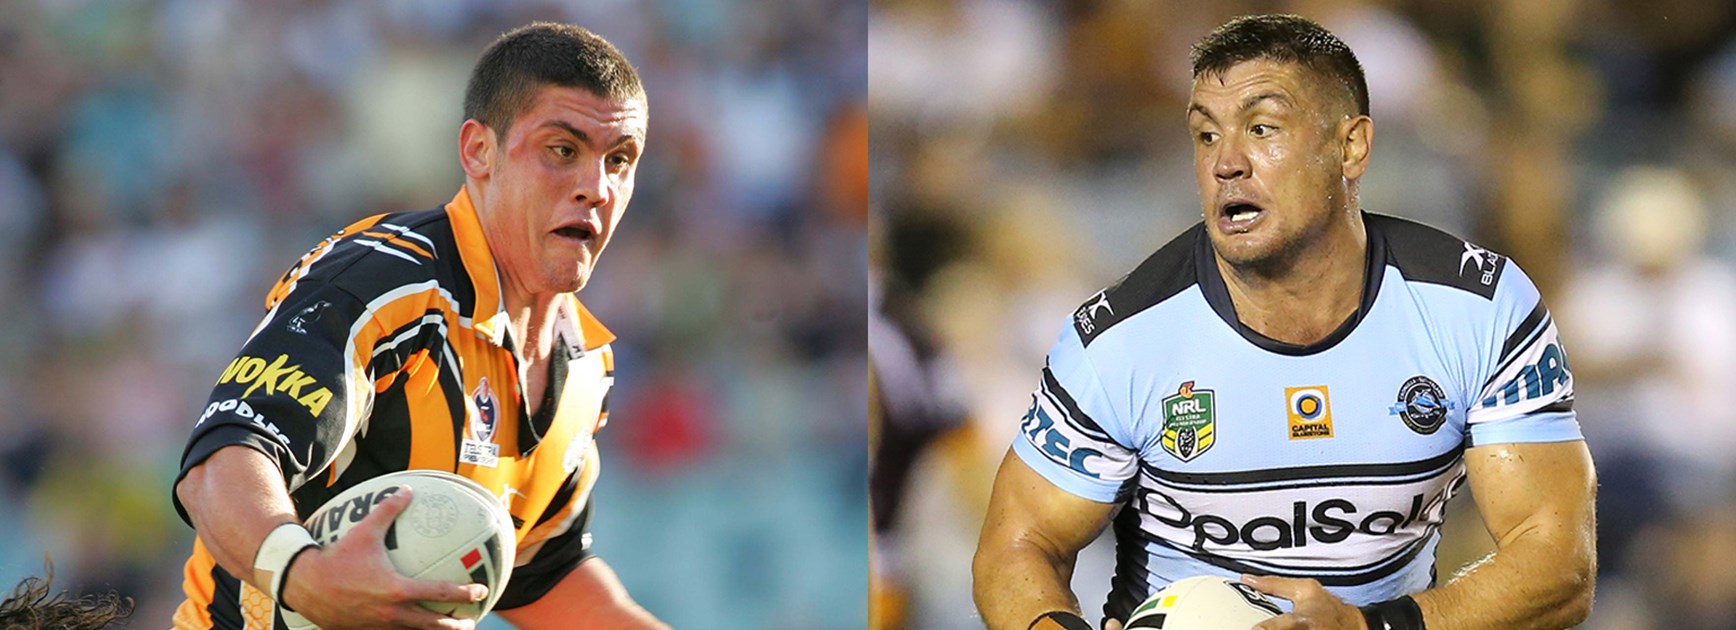 Chris Heighington is set to become the 26th player to reach the 300 NRL games milestone.